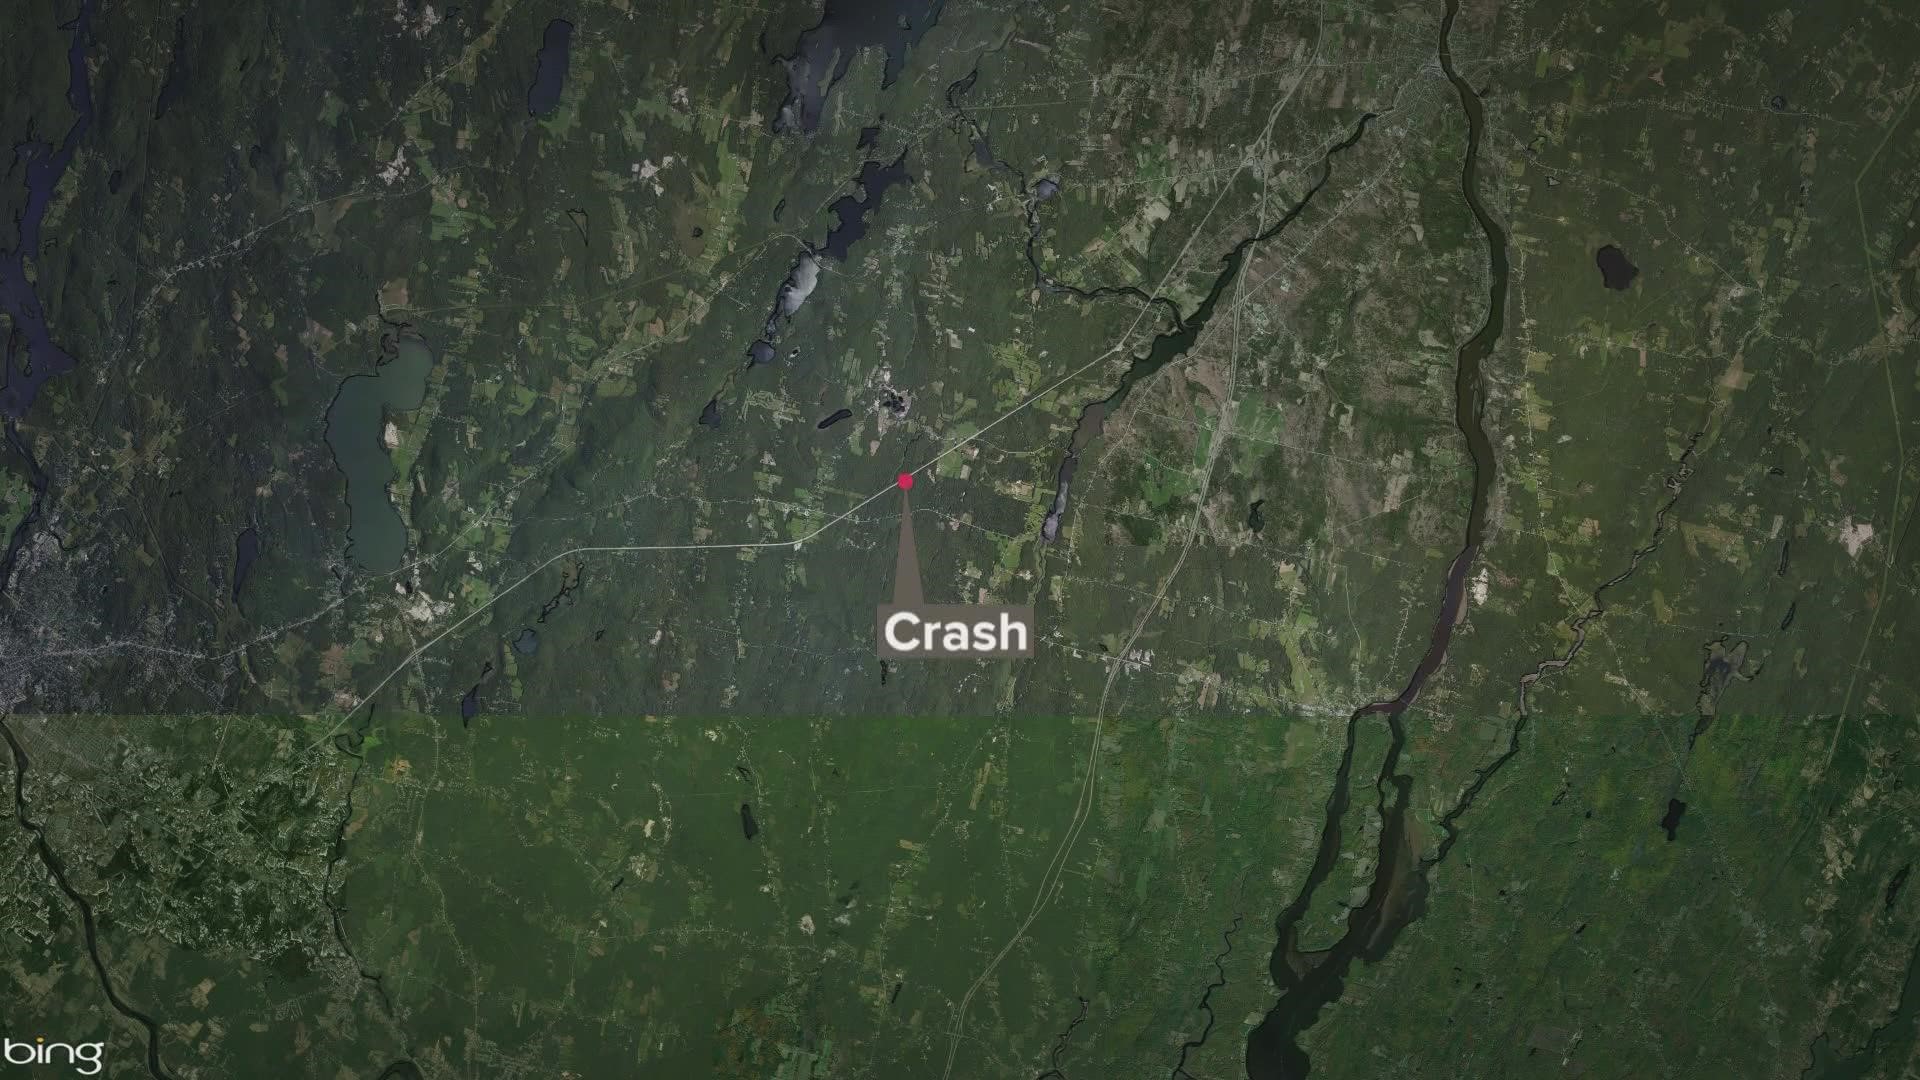 The crash took place on Thursday evening, authorities say.